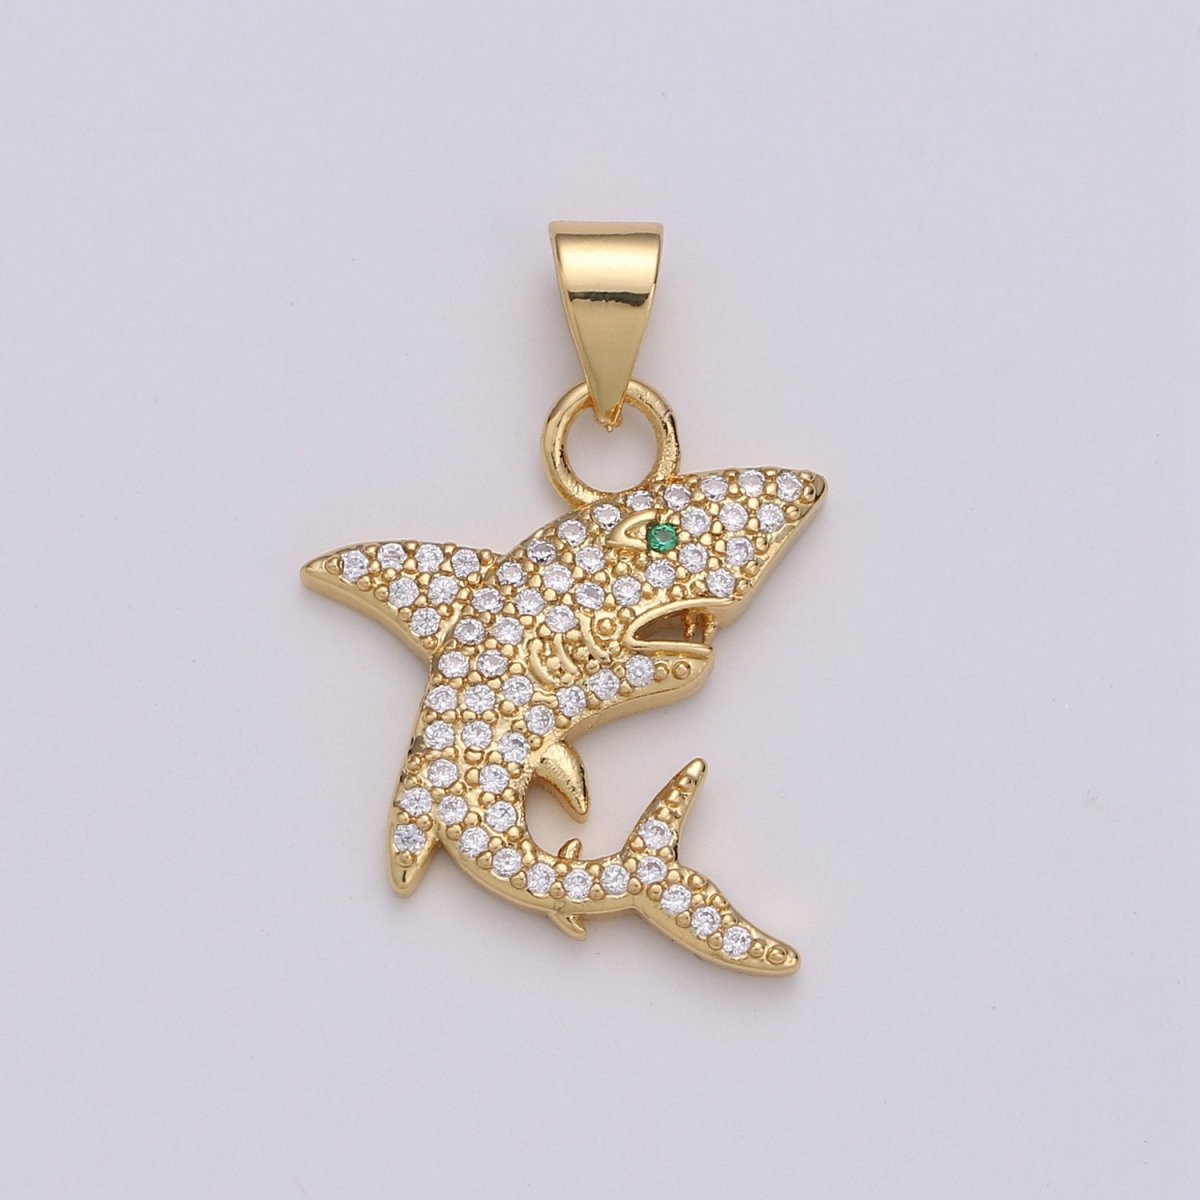 Micro Pave Shark 24K Gold Filled Charms, Gold Filled Fish Charm, Gold Baby Shark Under the sea Jewelry Inspired I-800 - DLUXCA